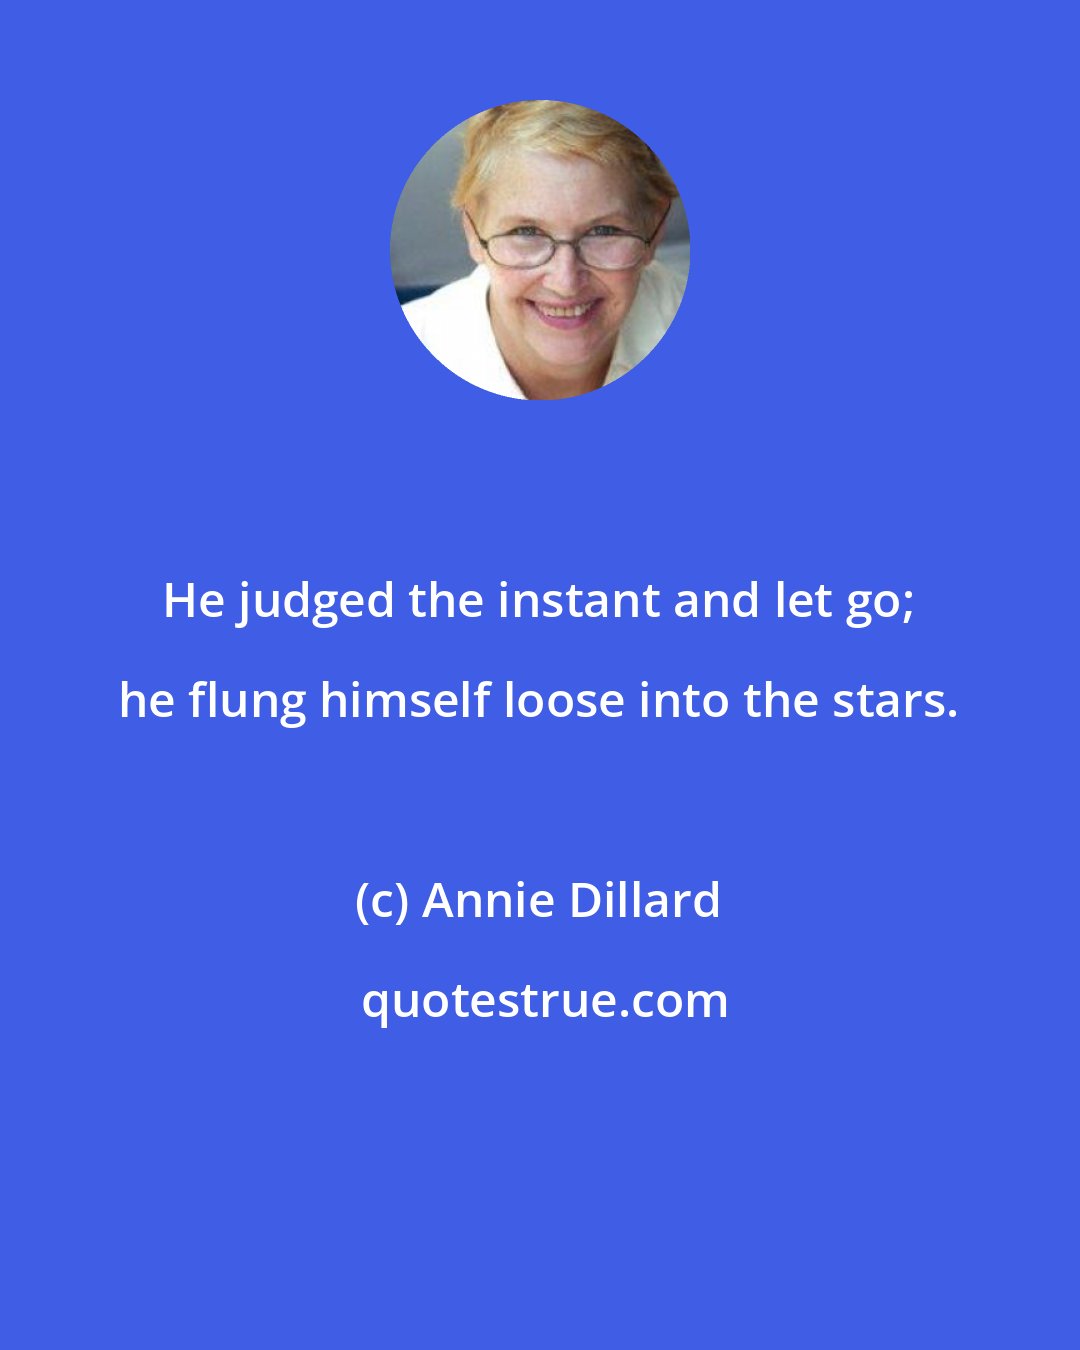 Annie Dillard: He judged the instant and let go; he flung himself loose into the stars.